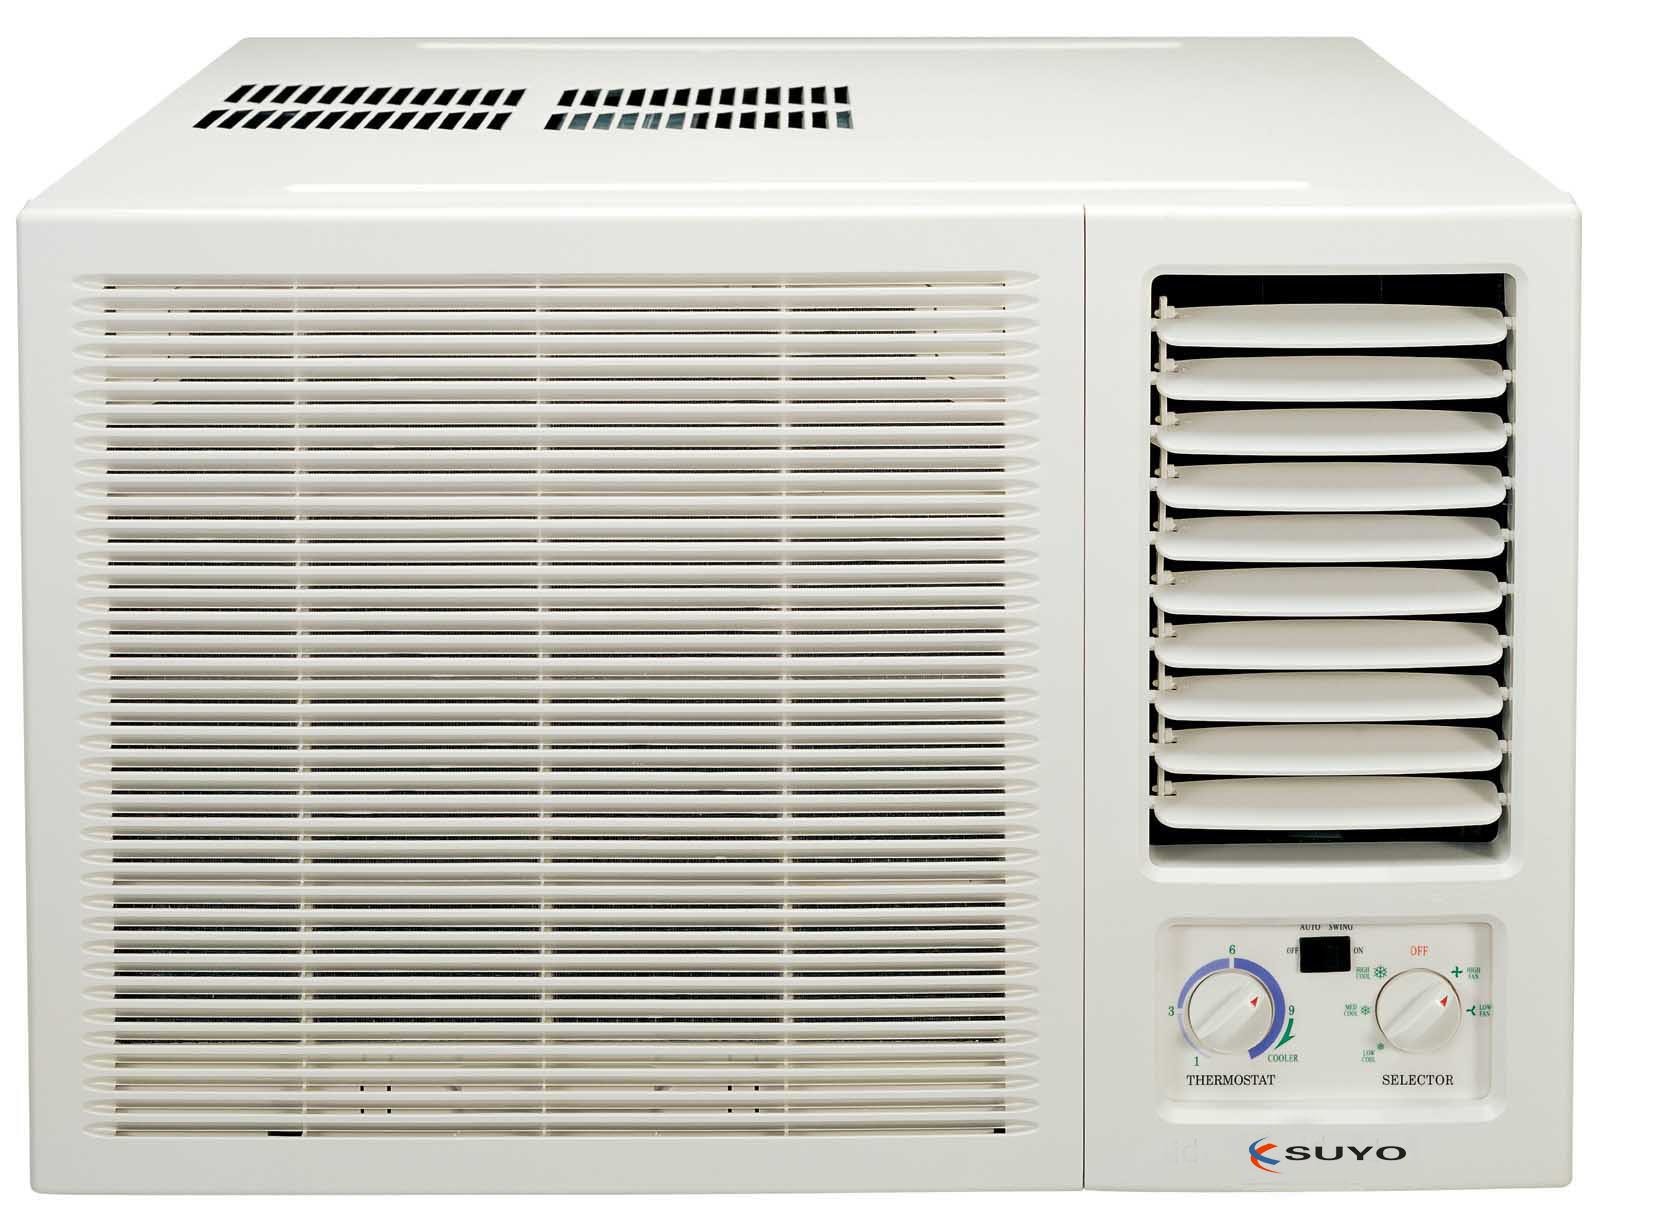 Auto Air Conditioning, Home Appliance (R)